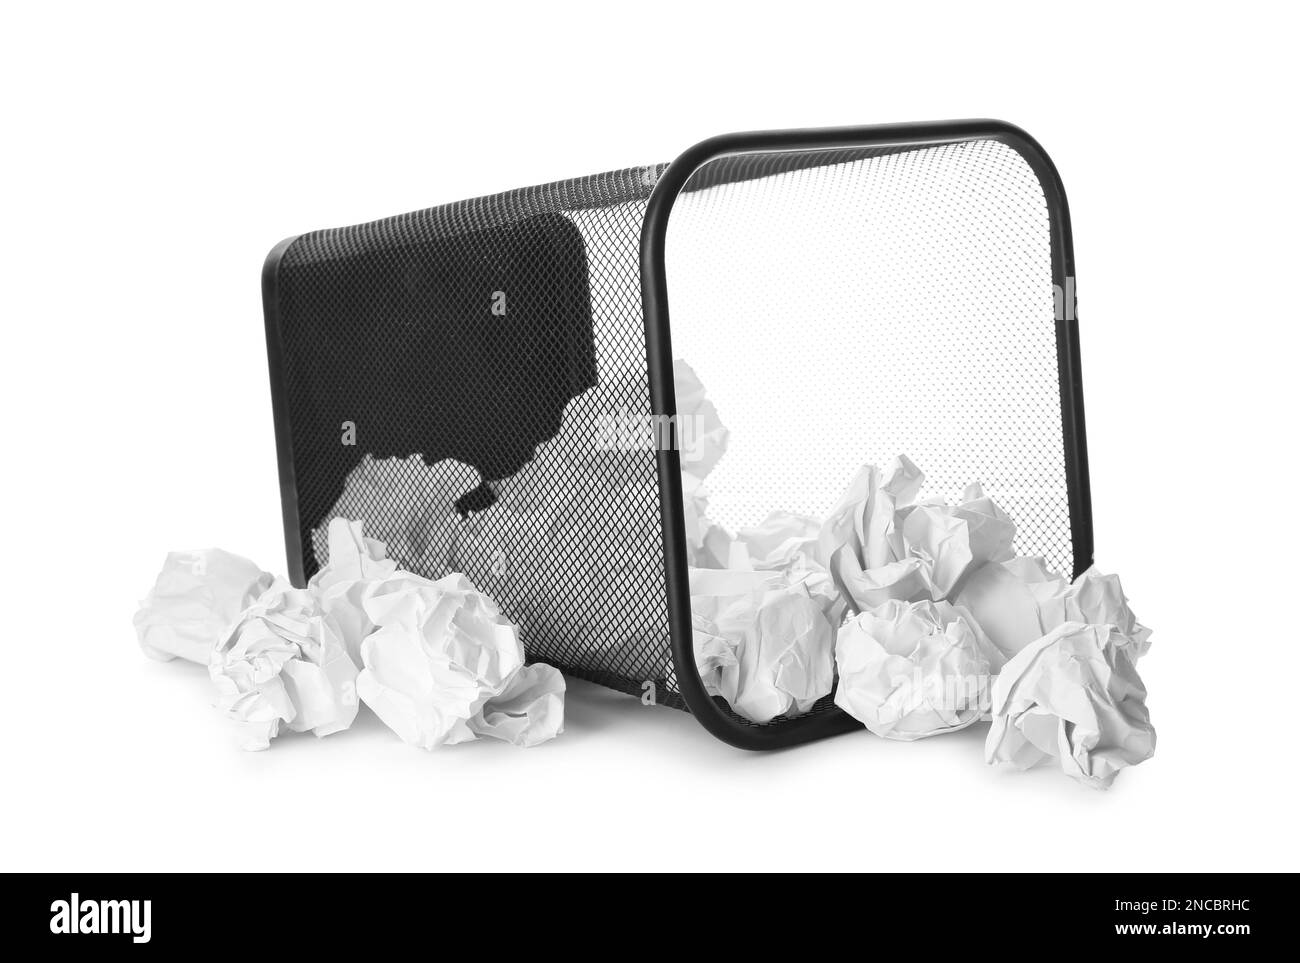 Basket with scattered crumpled paper balls on white background Stock Photo